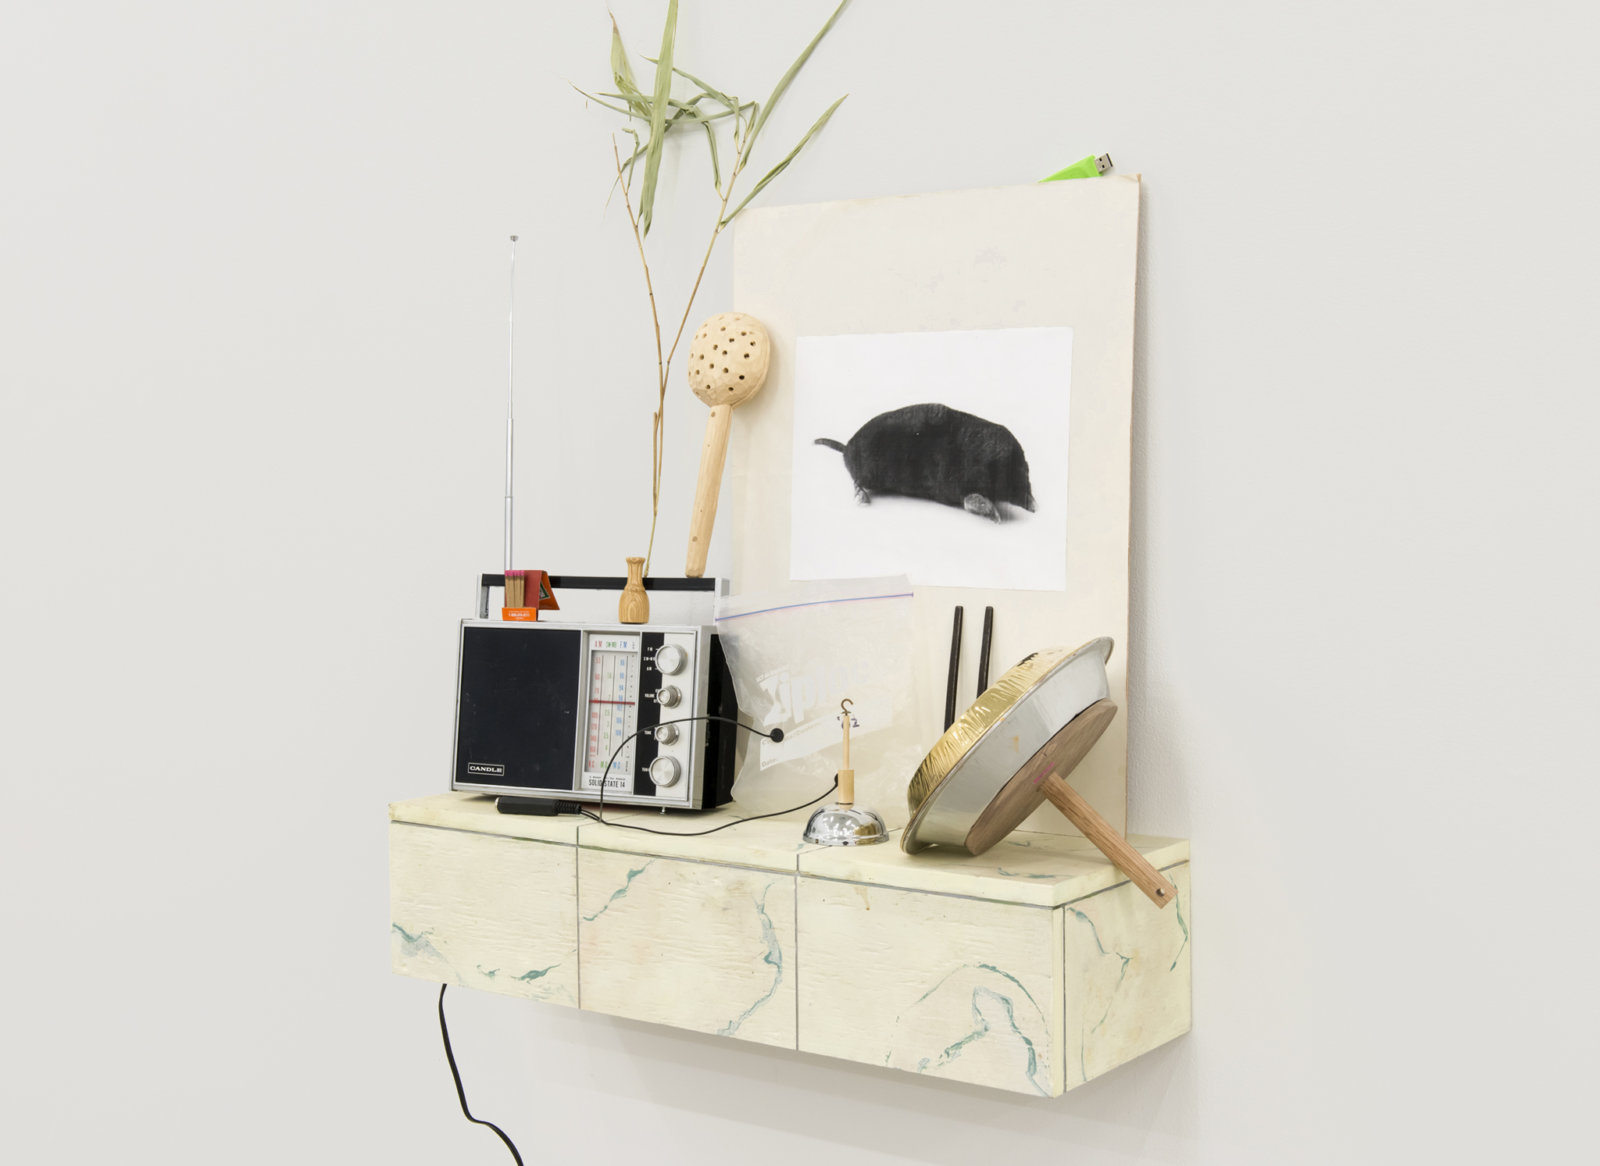 Ashes Withyman, Cetus, Compass, River, Furnas, Musca, Altar, Cup, 2017–2018, radio, matches, animal call, wood and stone rattle, photocopy, grass, usb flash drive, gold plated tin, sand, ziploc bag with contact microphone, tuning fork, dried grass, bell, painted plywood, 52 x 29 x 9 in. (132 x 74 x 23 cm)